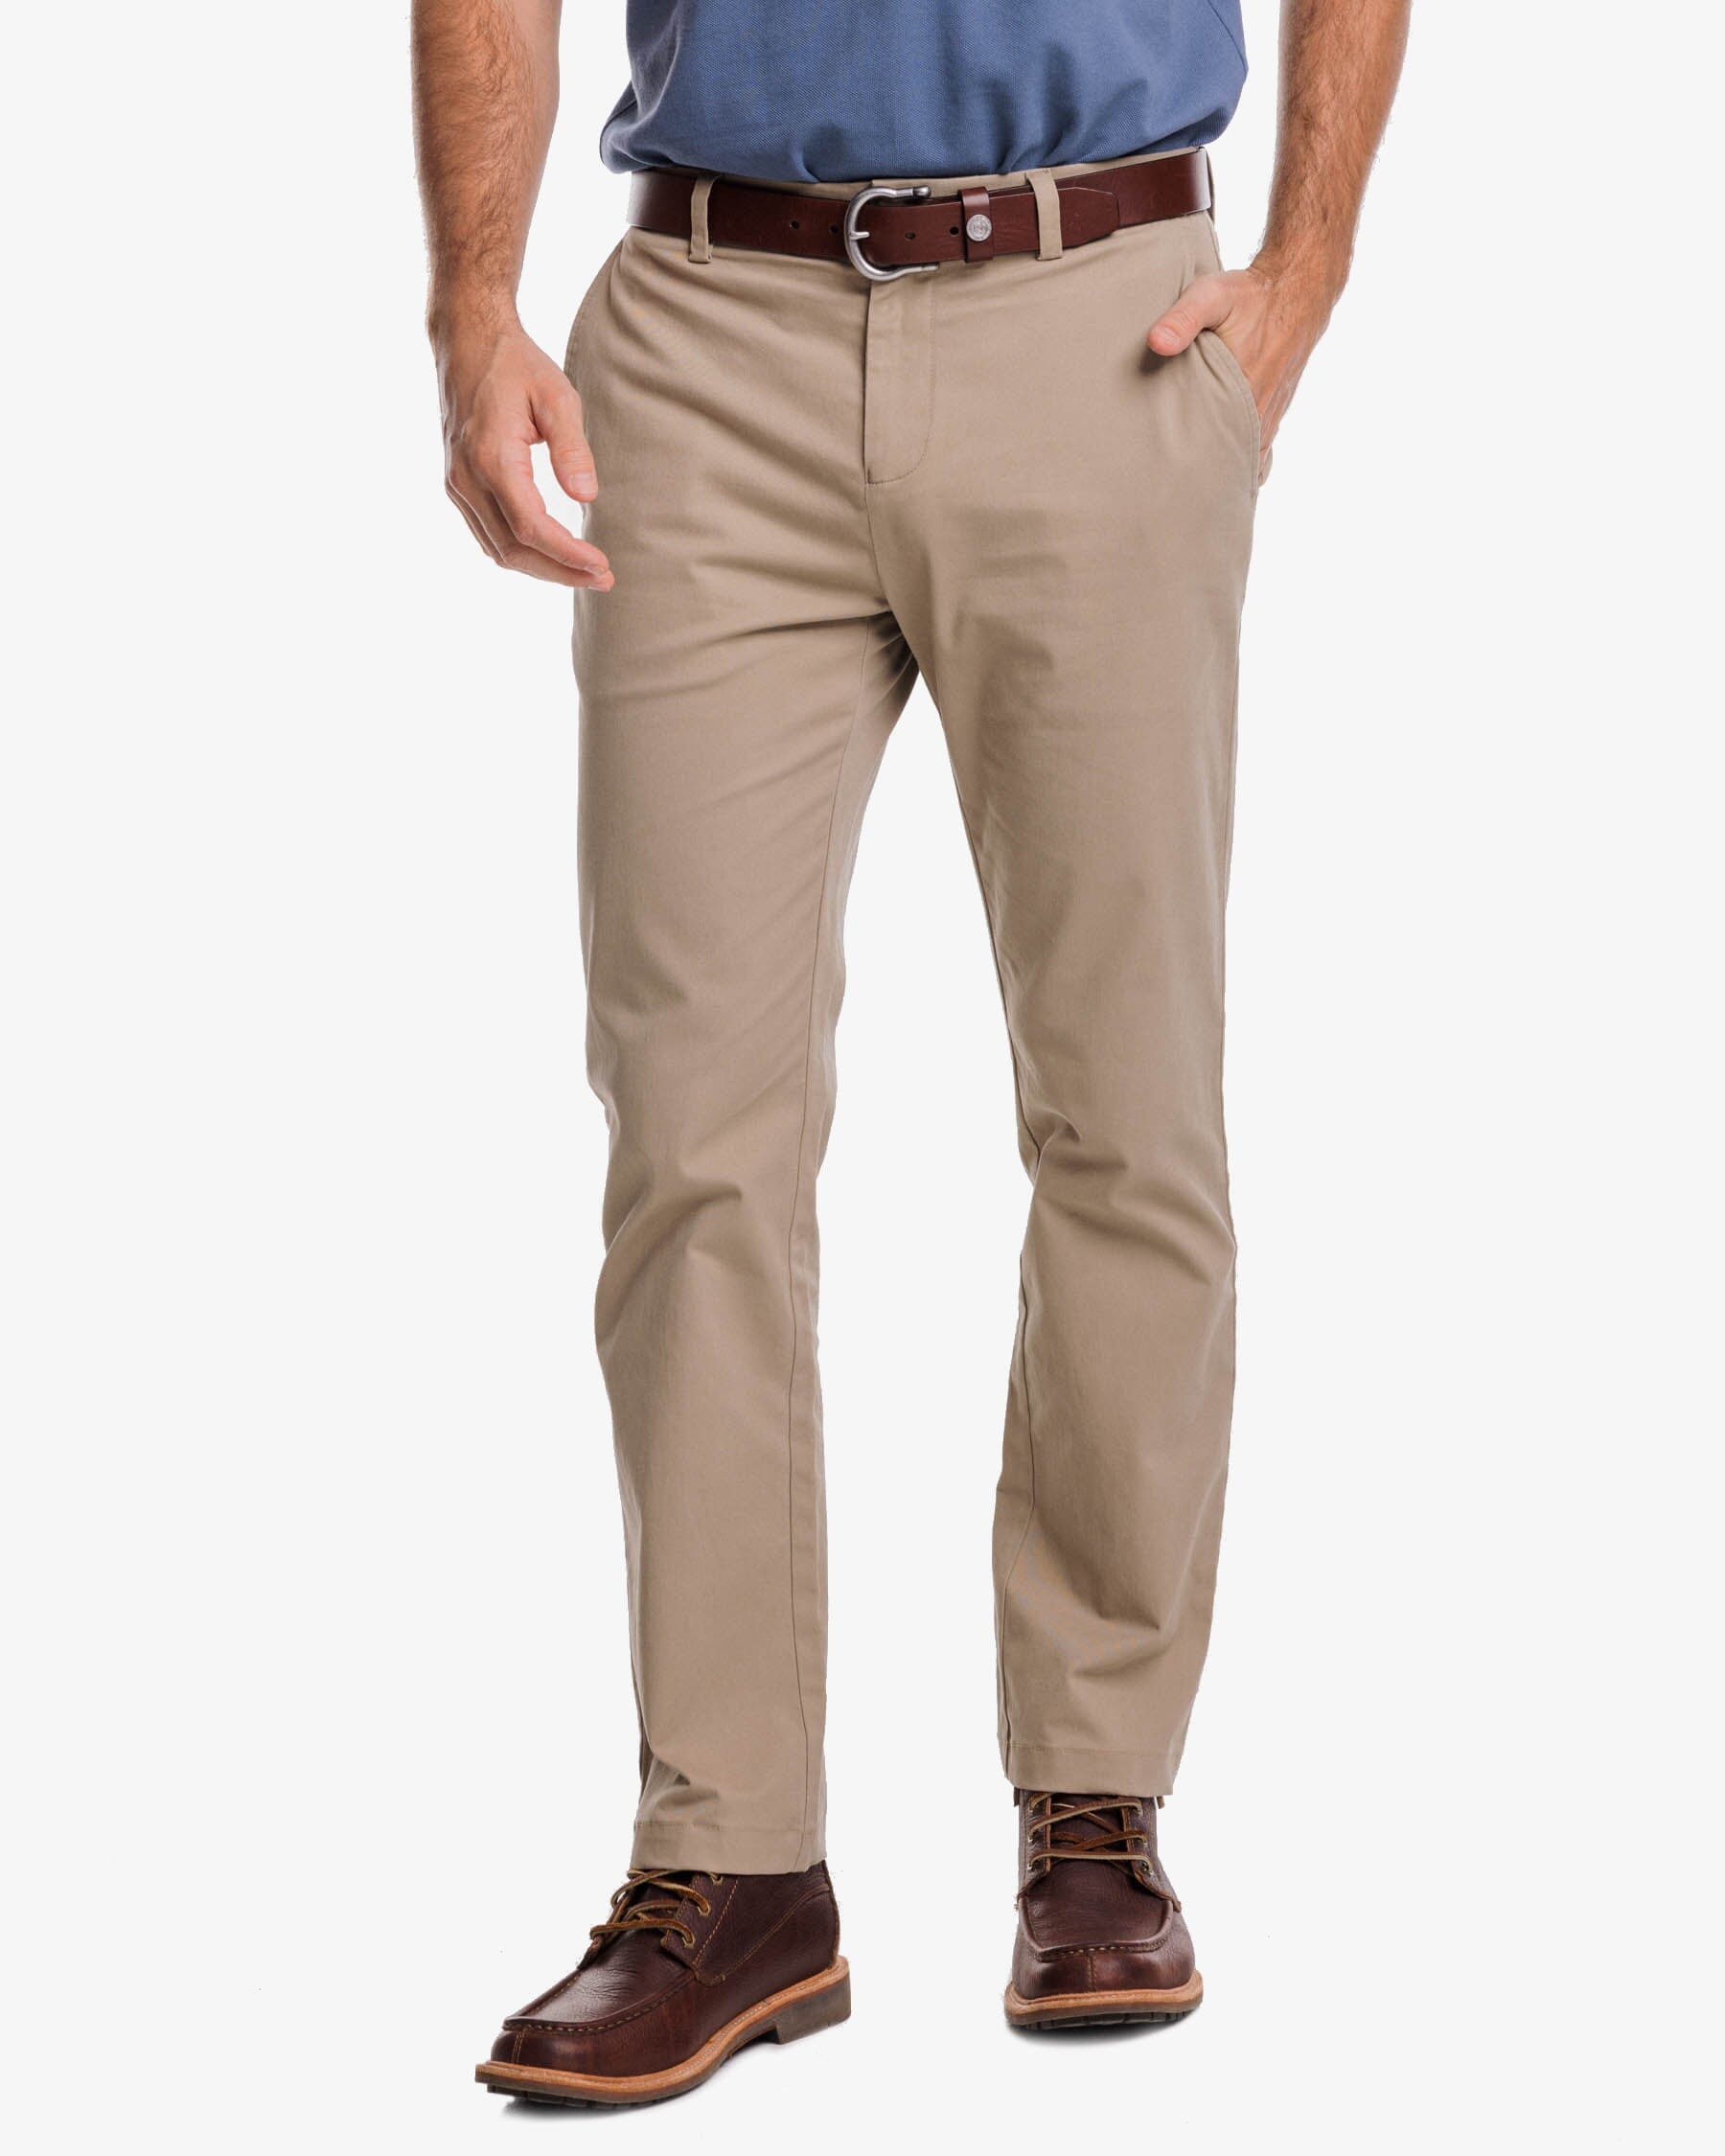 Men's Channel Marker Chino Pant in Khaki | Southern Tide